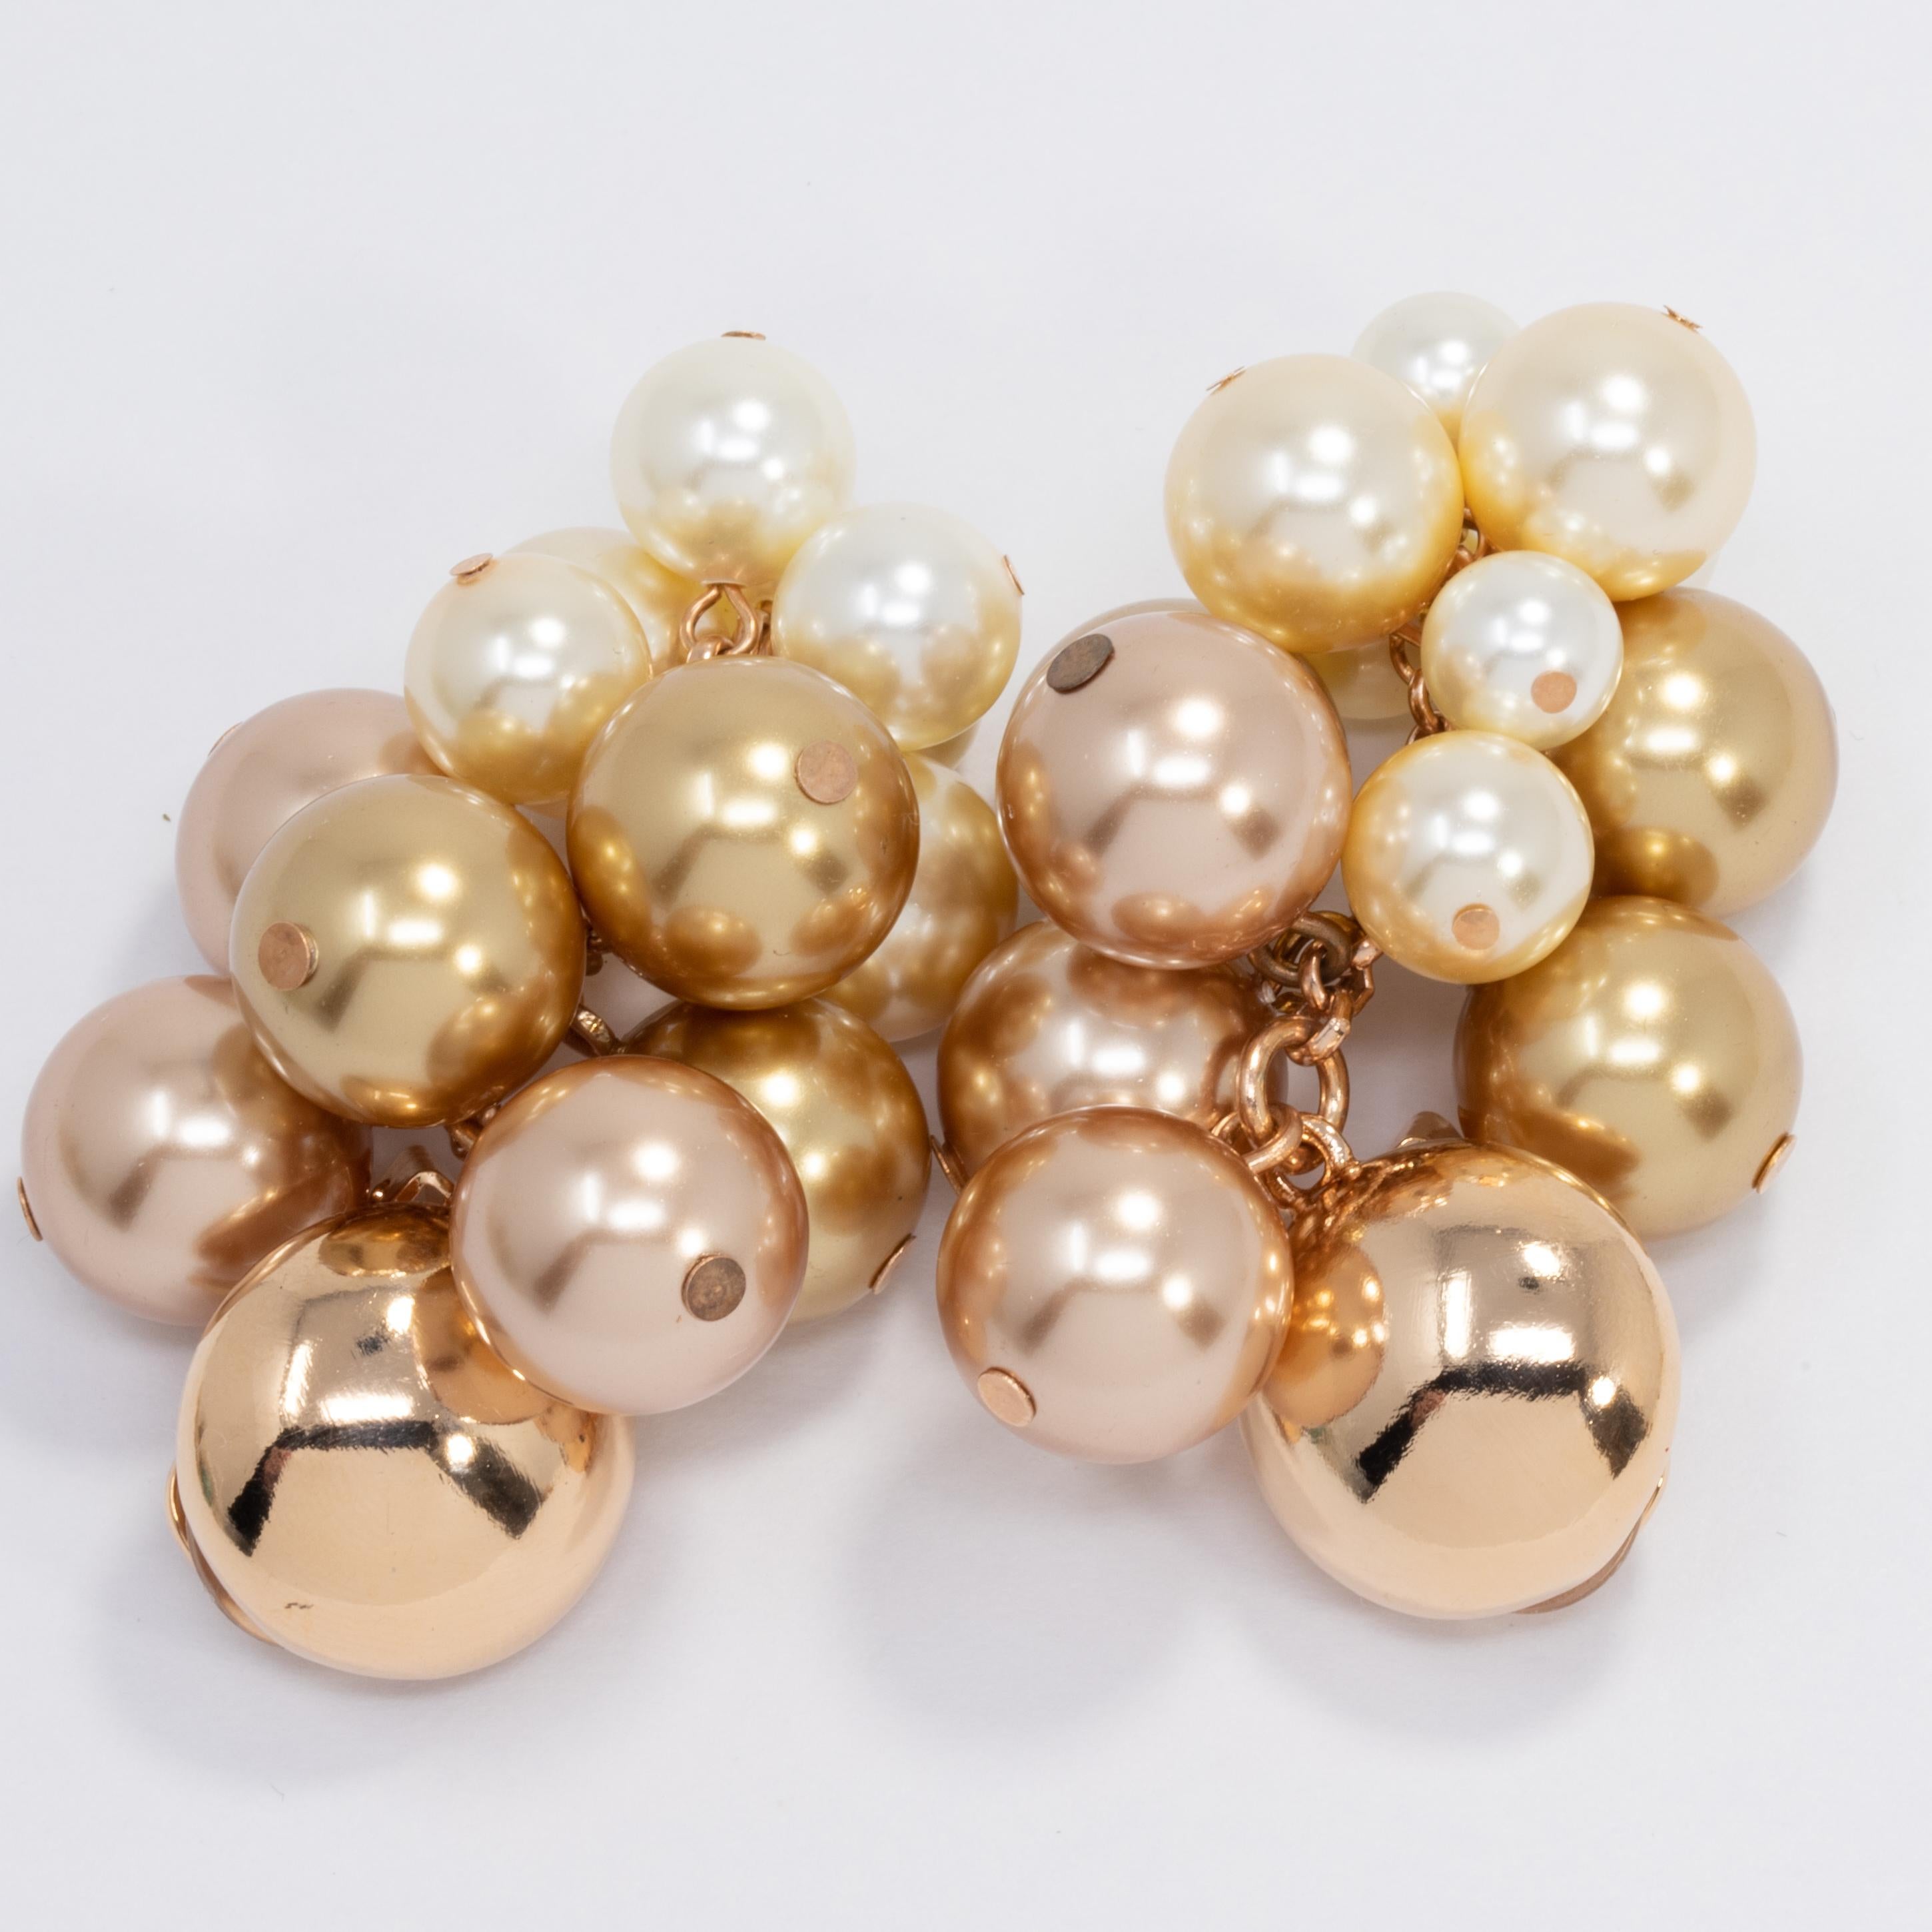 A pair of Oscar de la Renta clip on earrings. Each features a cluster or light-toned faux pearls of various sizes. Bold and stylish! 

Hallmarks: Oscar de la Renta, Made in USA